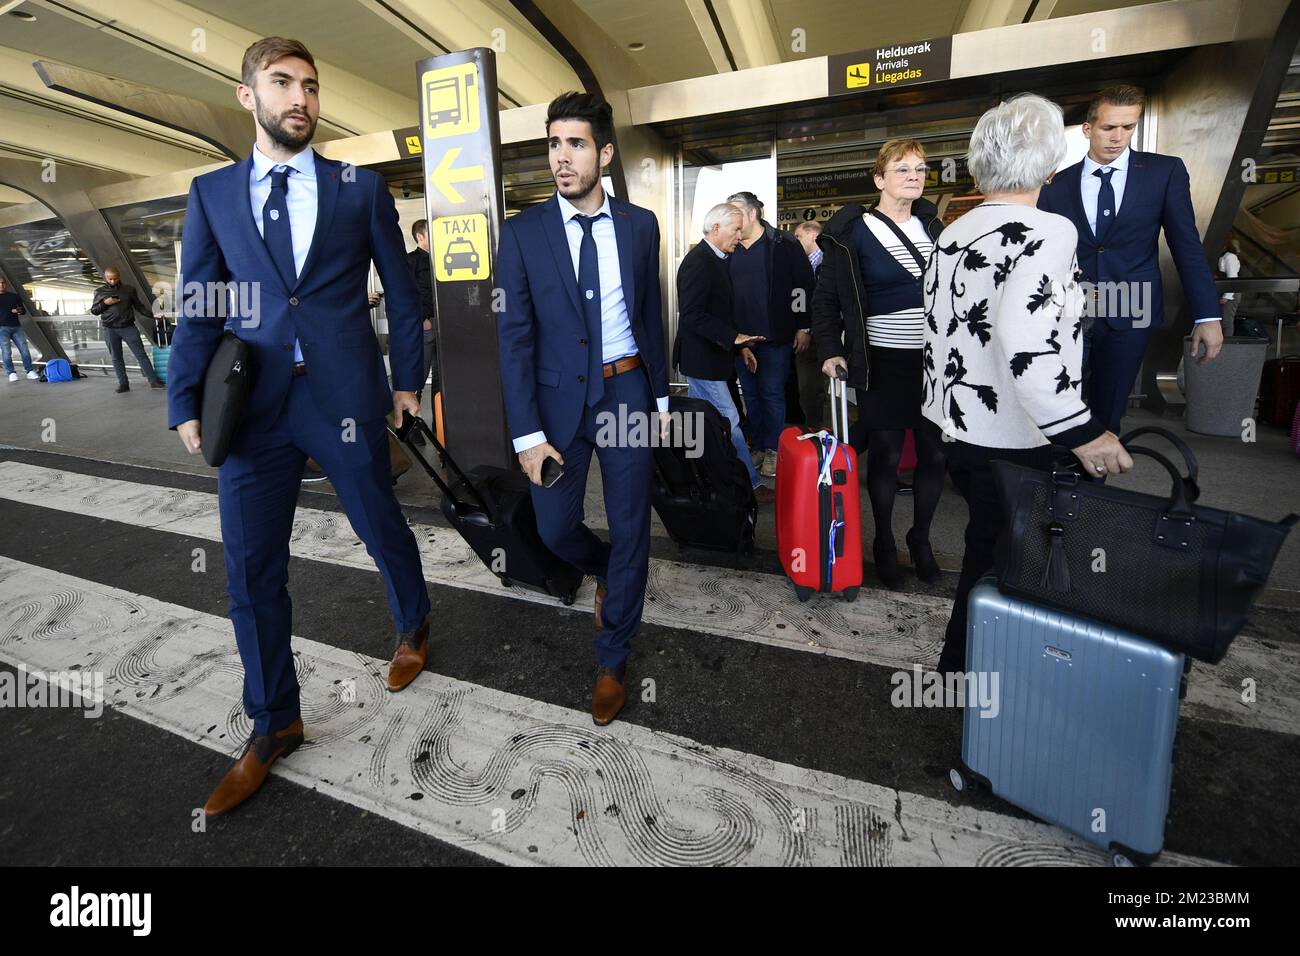 Genk's Tino-Sven Susic, Genk's Alejandro Pozuelo and Genk's goalkeeper Marco Bizot pictured after the arrival of Belgian first league soccer team KRC Genk at the airport in Bilbao, Spain, Wednesday 02 November 2016. Tomorrow KRC Genk is playing the fourth game of the group stage of the Europa League competition against Spanish Club Athletic Bilbao, in Group F. BELGA PHOTO YORICK JANSENS Stock Photo